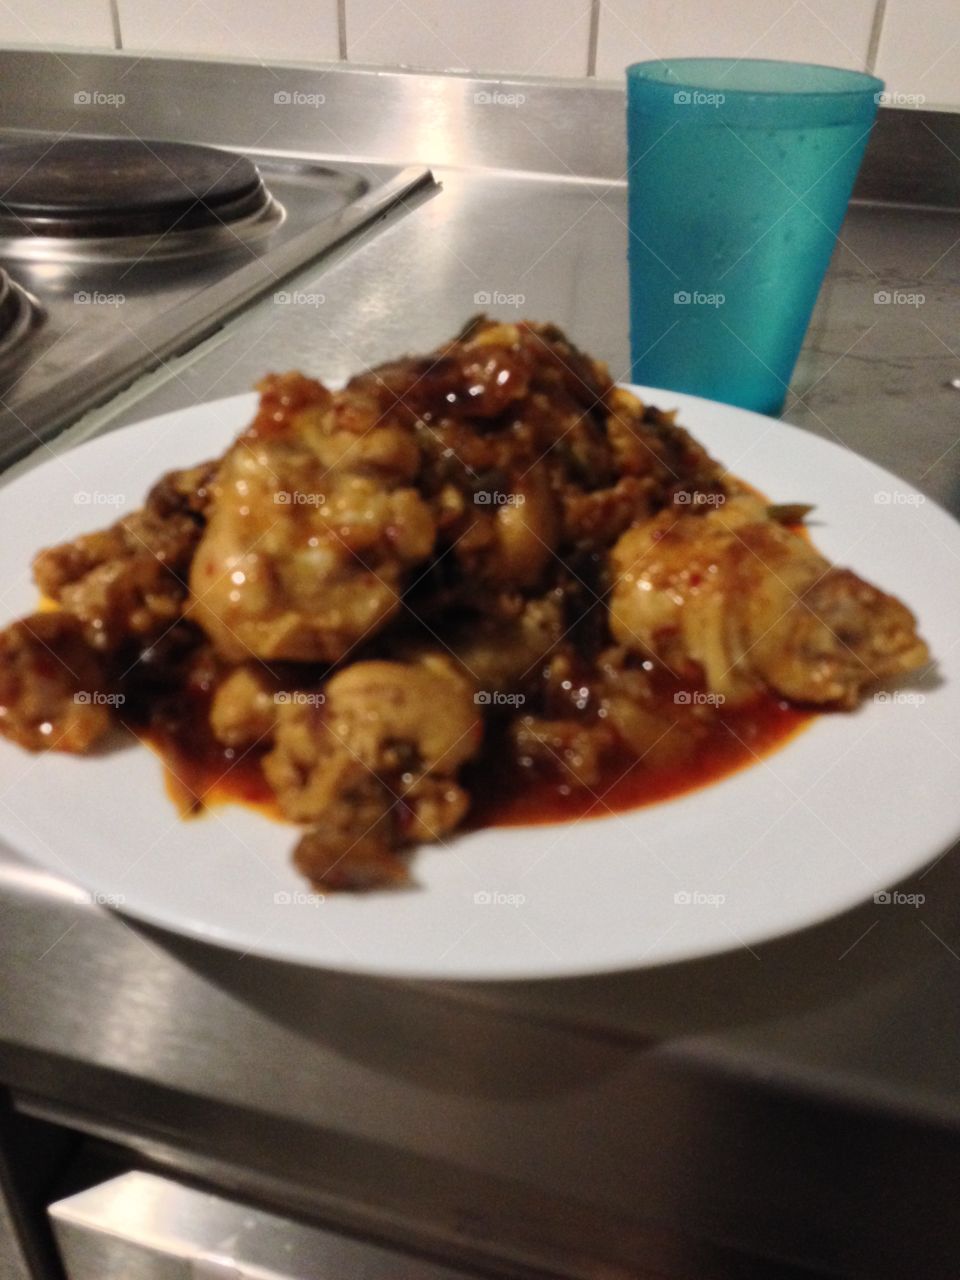 Chilli chicken 
My favorite 
Food is life 